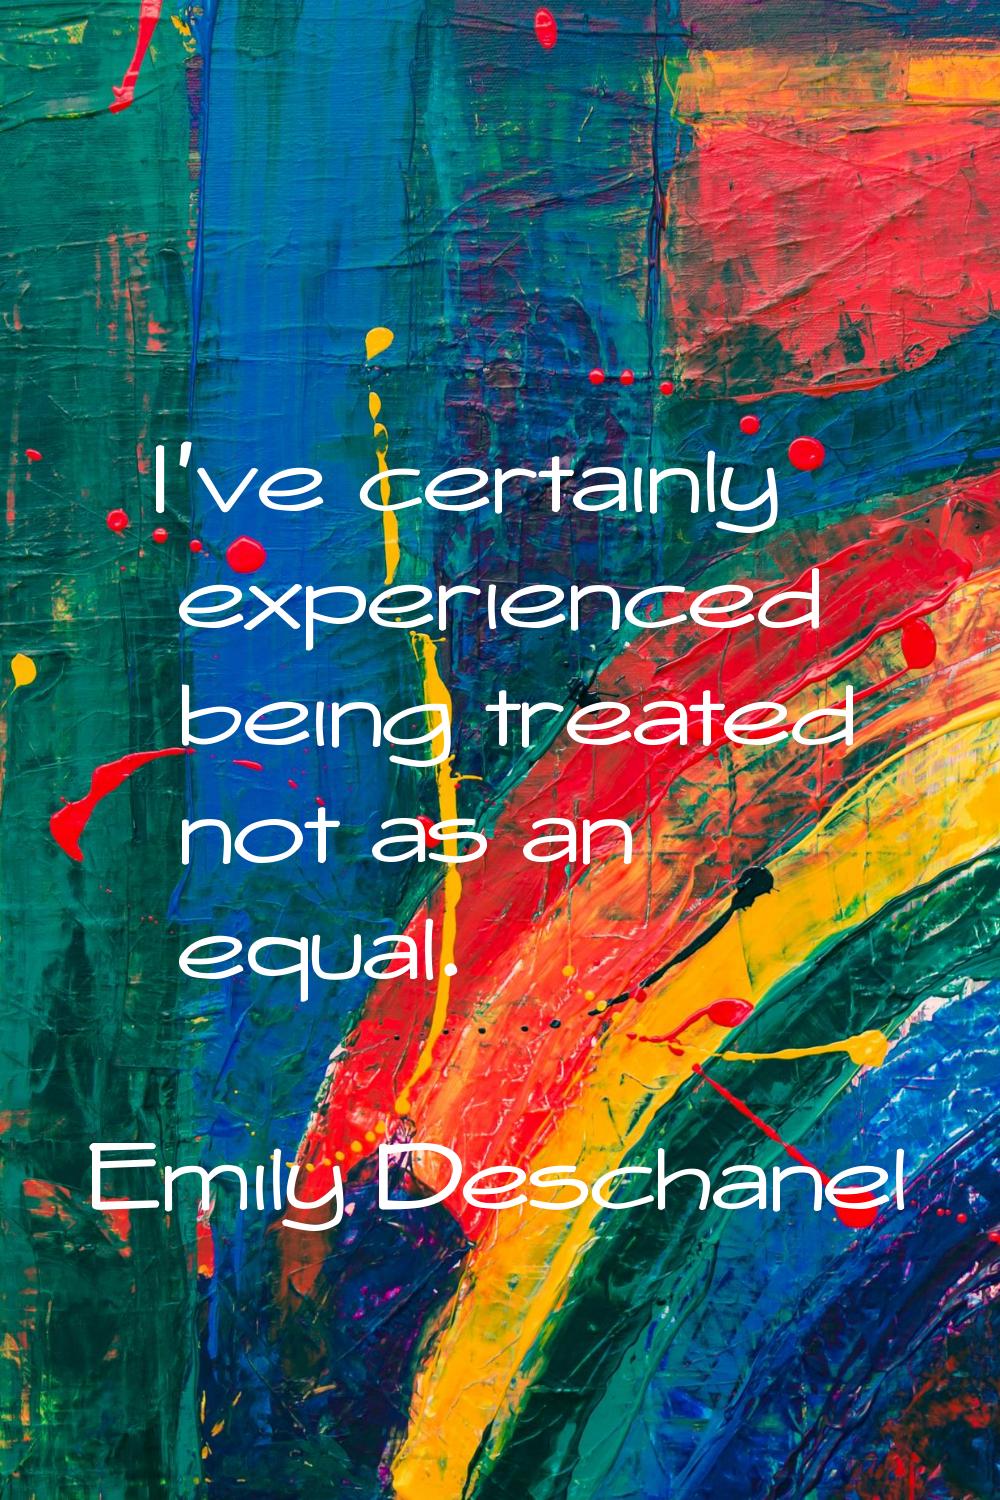 I've certainly experienced being treated not as an equal.